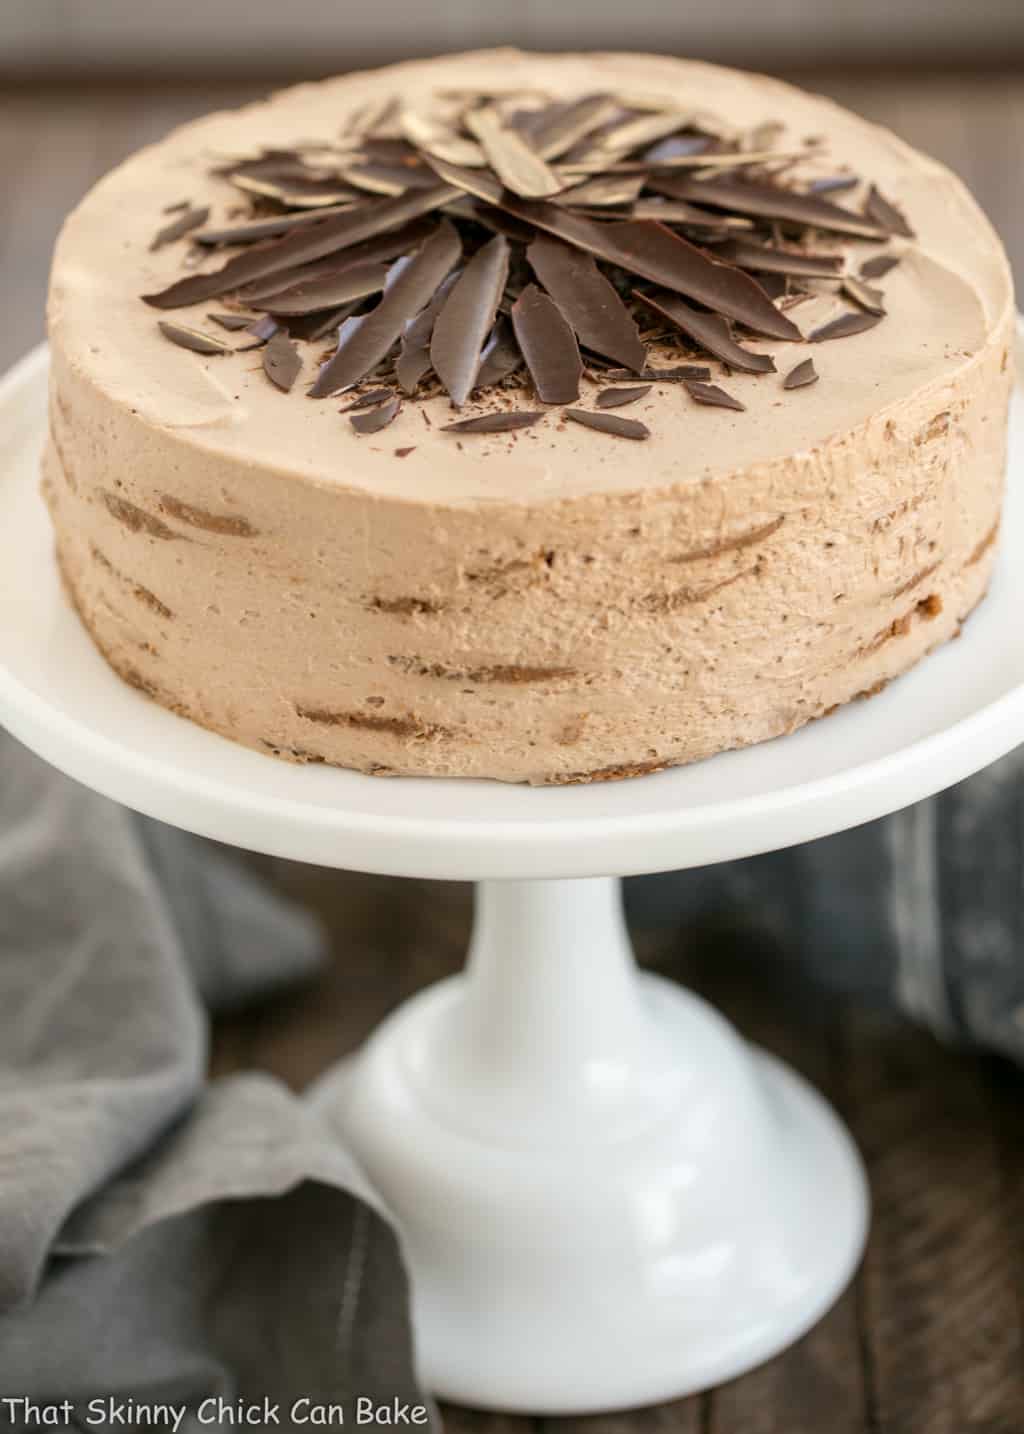 Mocha Chocolate Chip Cookie Icebox Cake on a white cake stand.